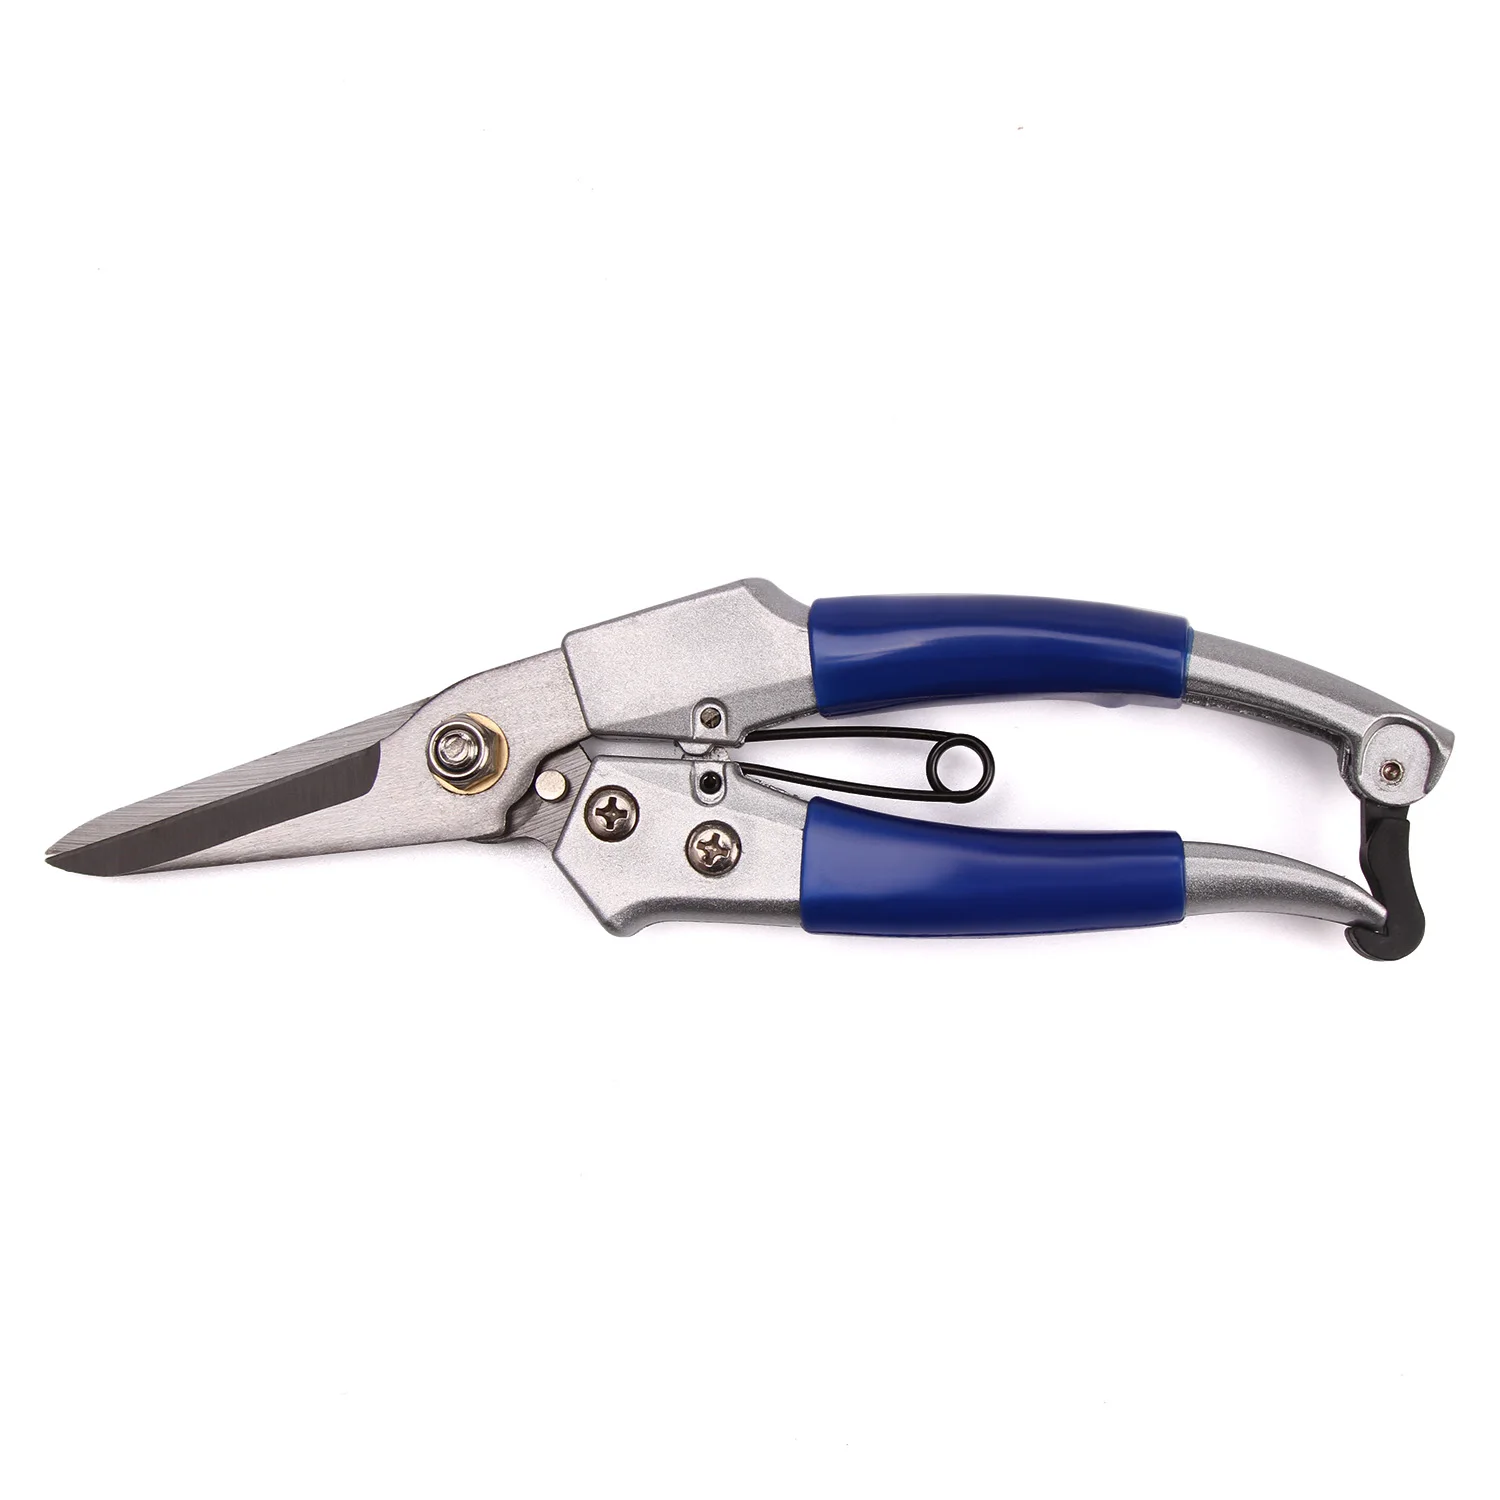 Garden Pruning Shears Picking Scissors Potted Trim Weed  Branches Scissors 